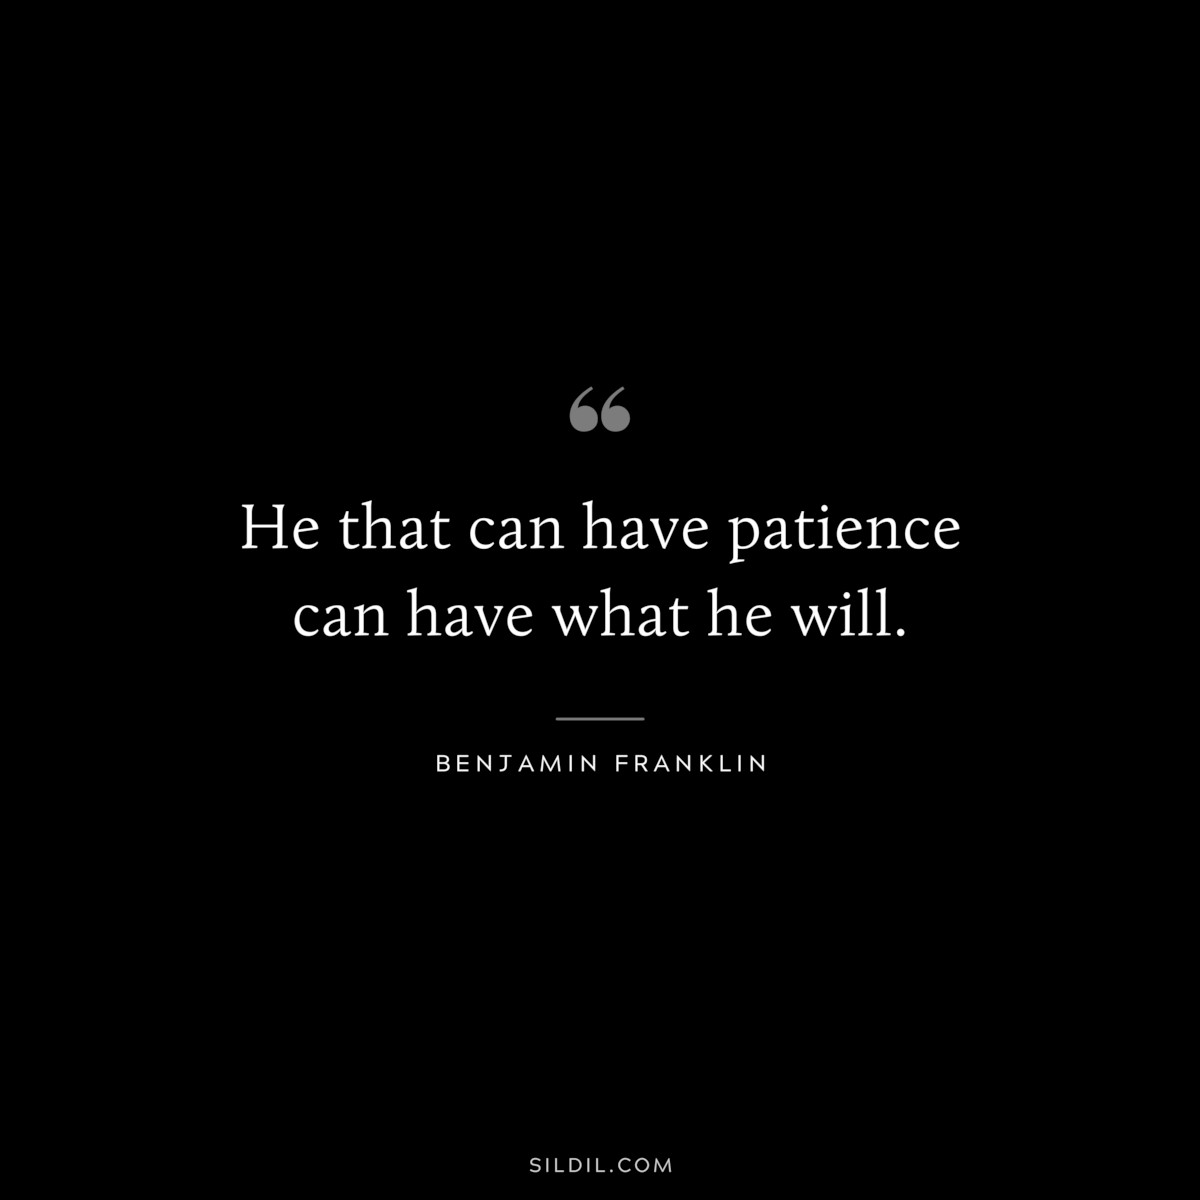 He that can have patience can have what he will. ― Benjamin Franklin